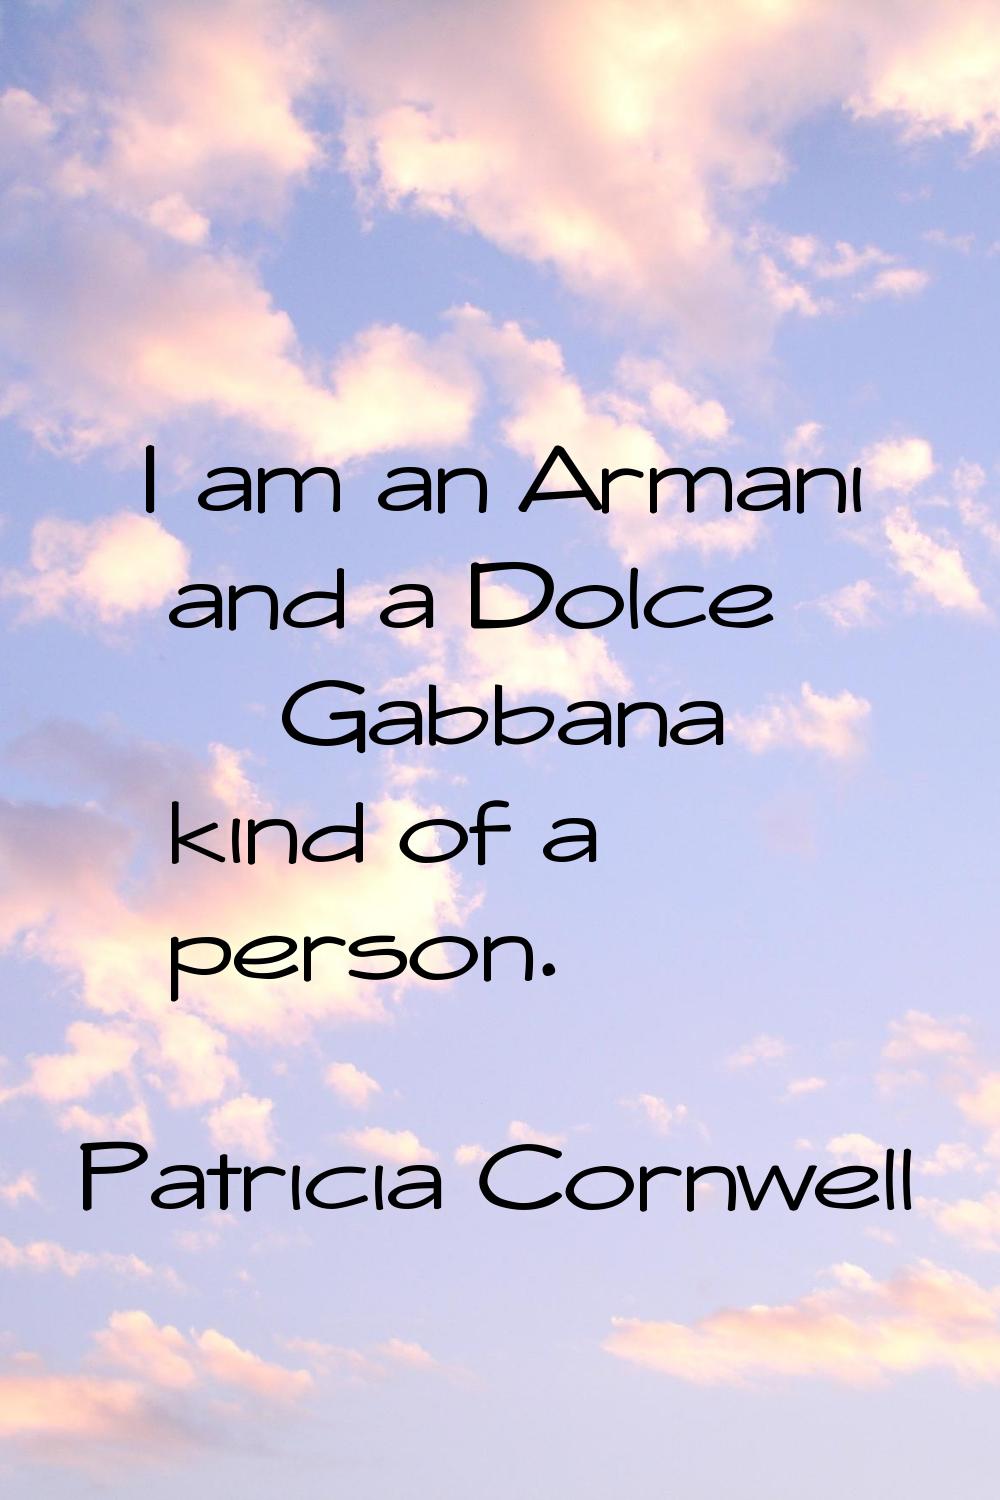 I am an Armani and a Dolce & Gabbana kind of a person.